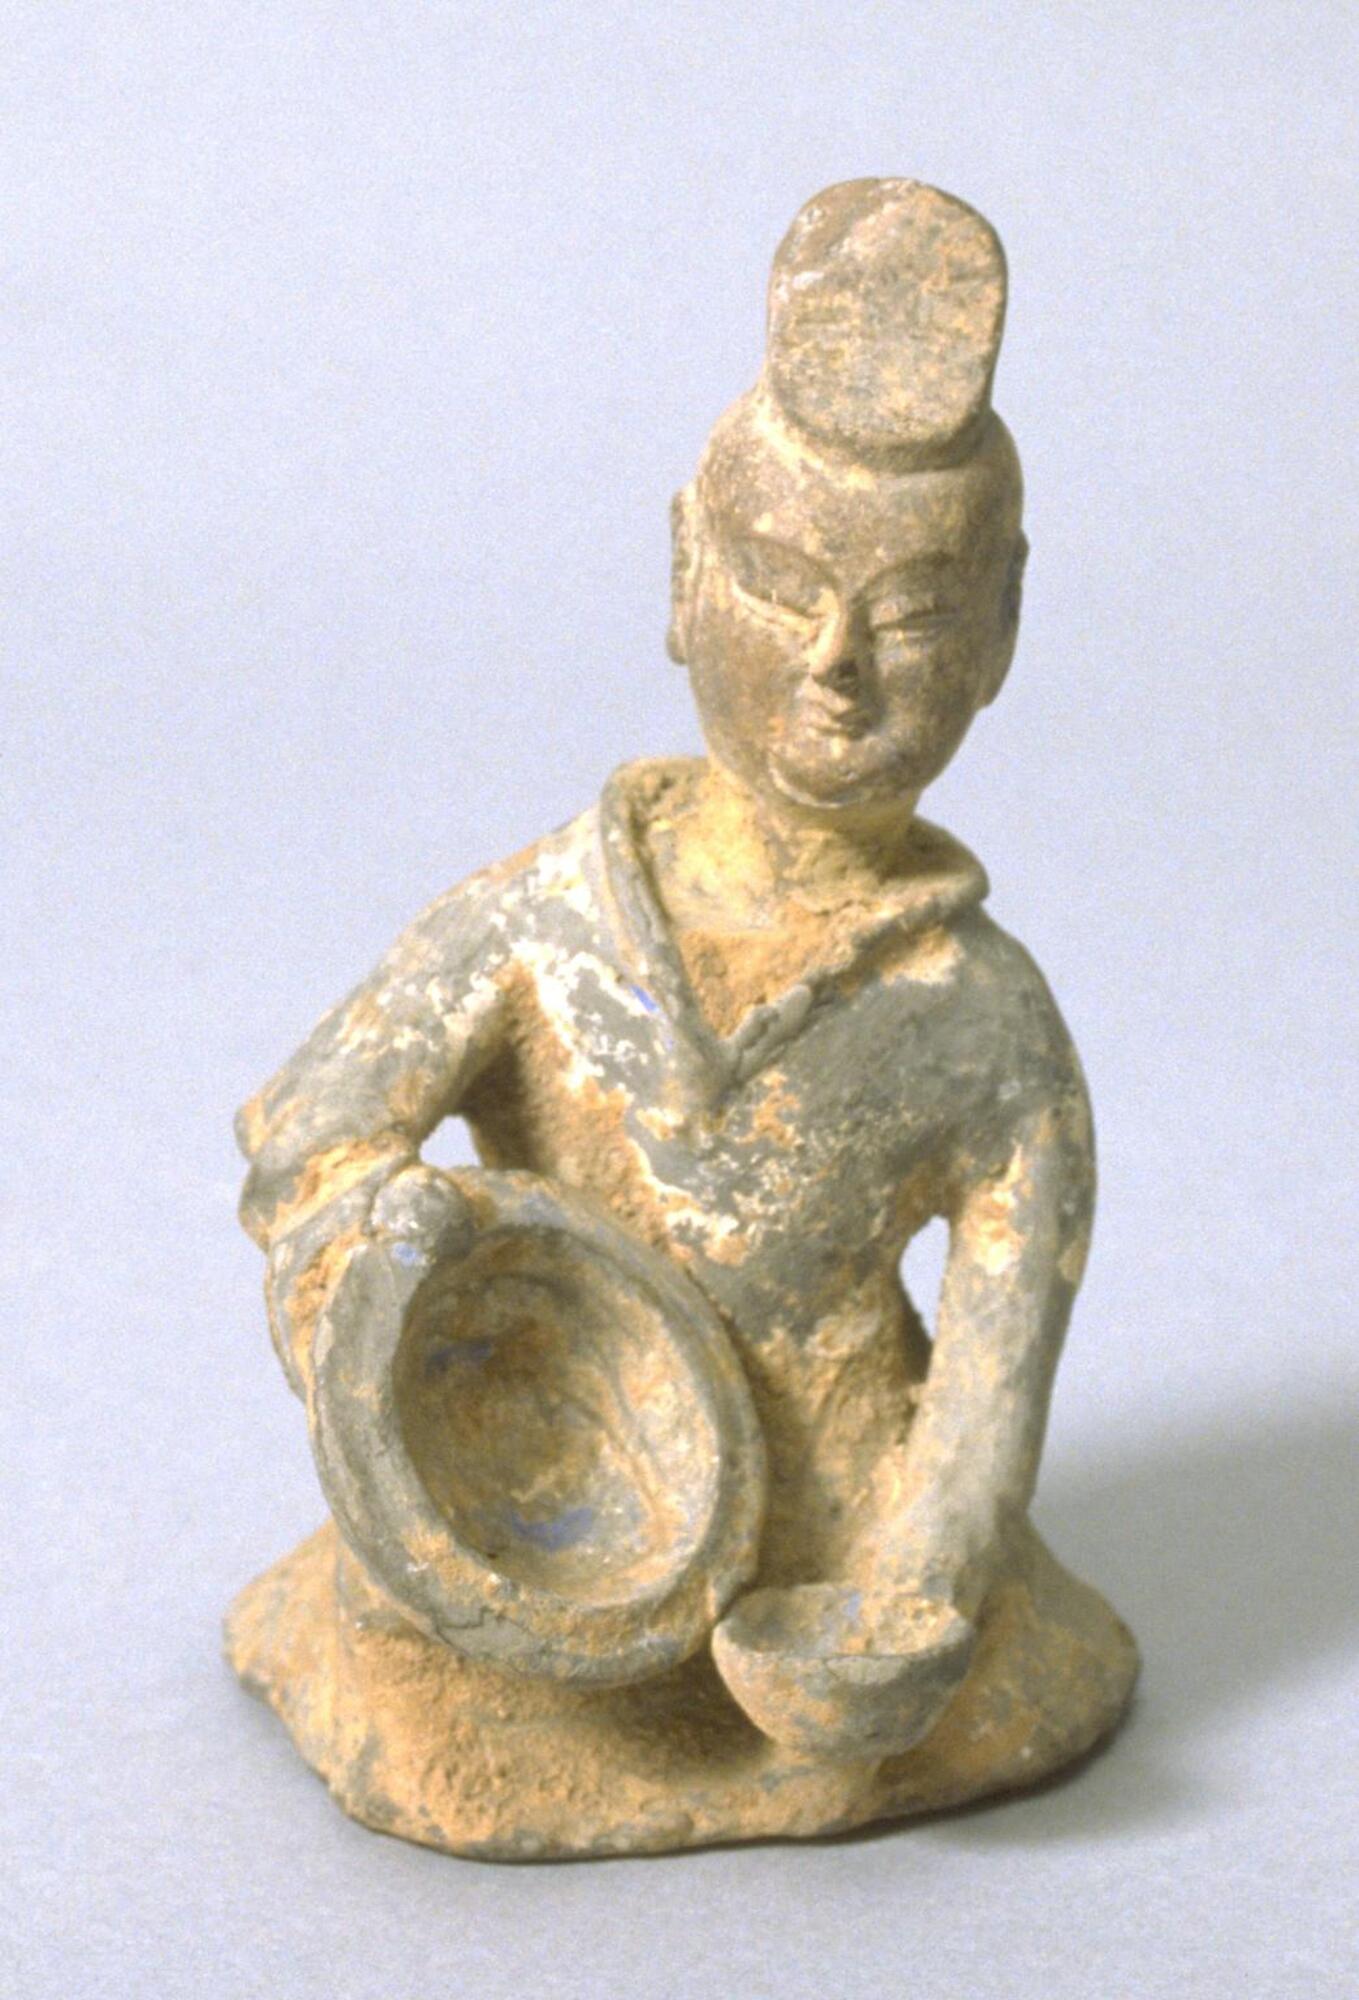 This is s clay figure of a seated woman wearing an officials cap and a robe. She is holding two bowls, shown in the action of pouring the contents from the larger bowl into the smaller bowl.